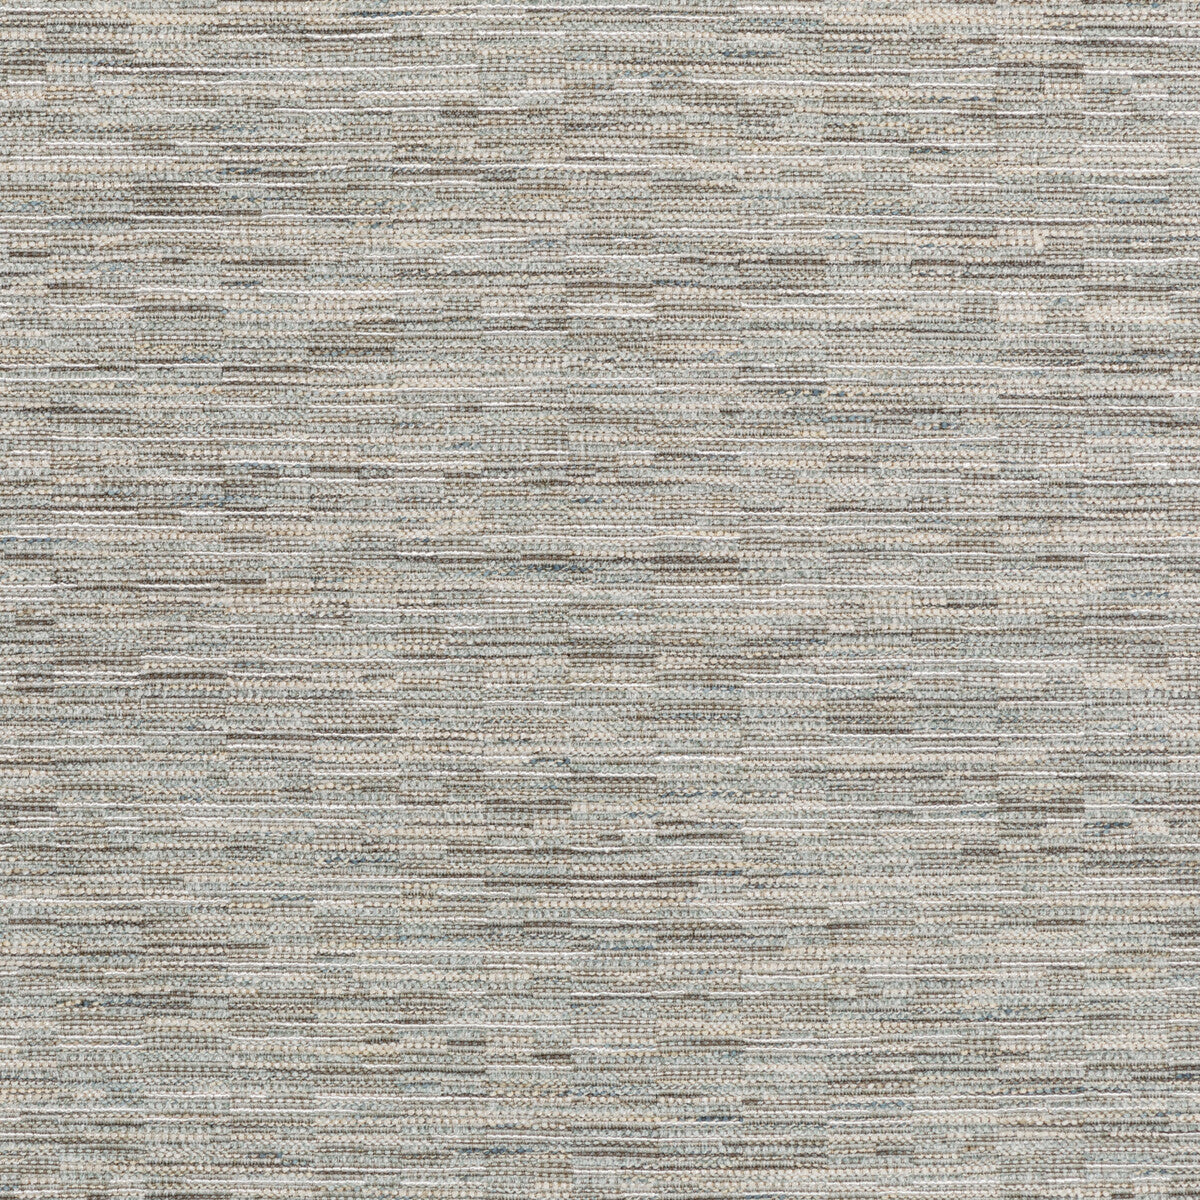 Noni Texture fabric in platinum color - pattern 36050.115.0 - by Kravet Couture in the Luxury Textures II collection